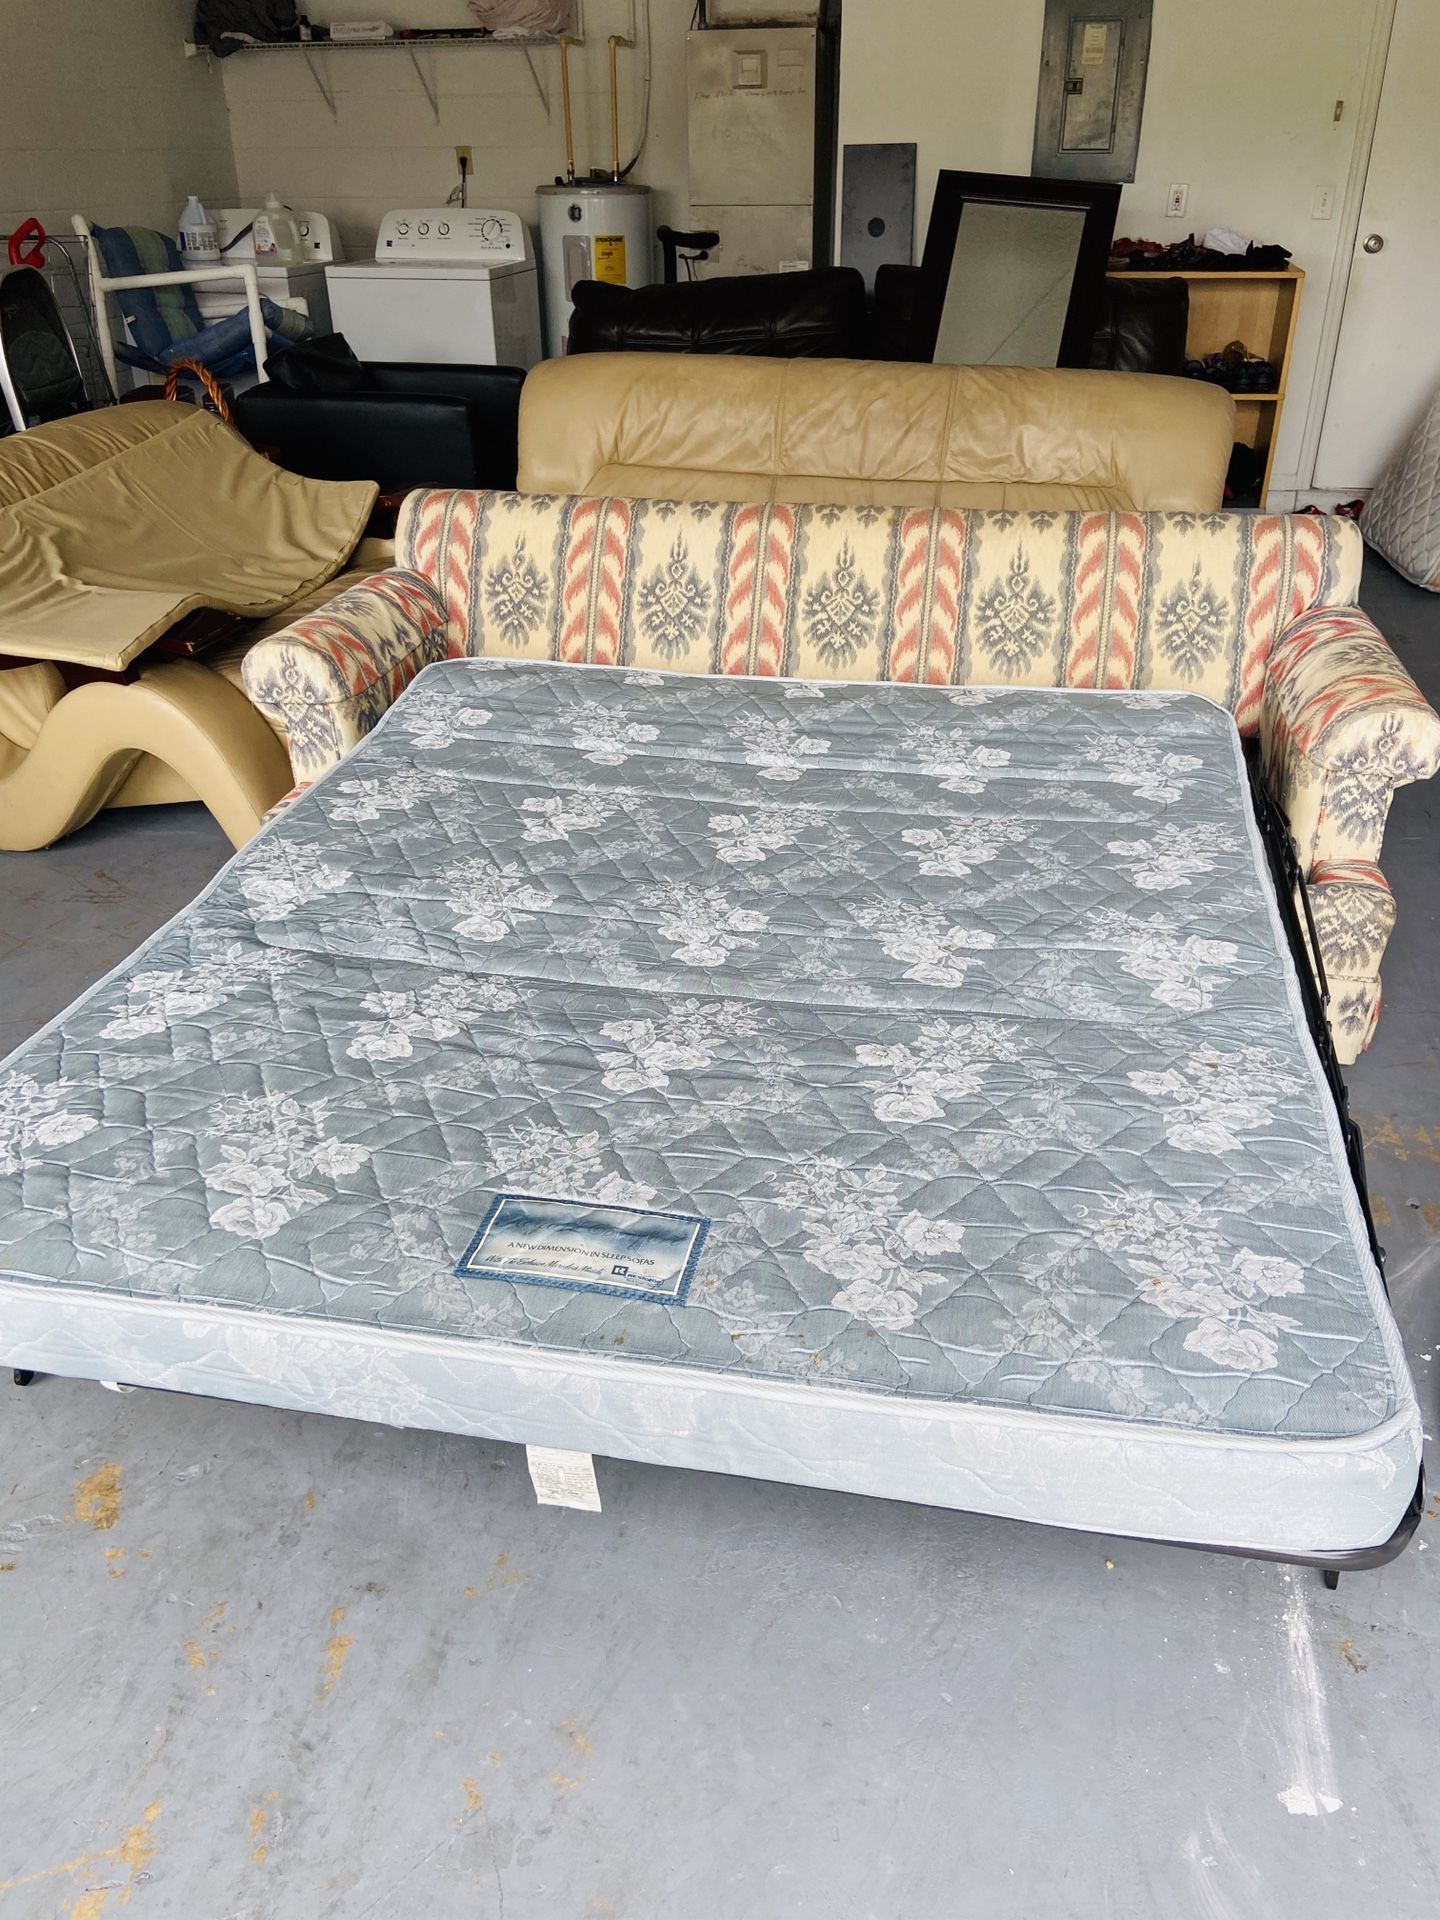 🌟 SOFA BED 🌟 Sleeper Couch Pull out queen size bed + mattress / guest bed / extra bed /space saver